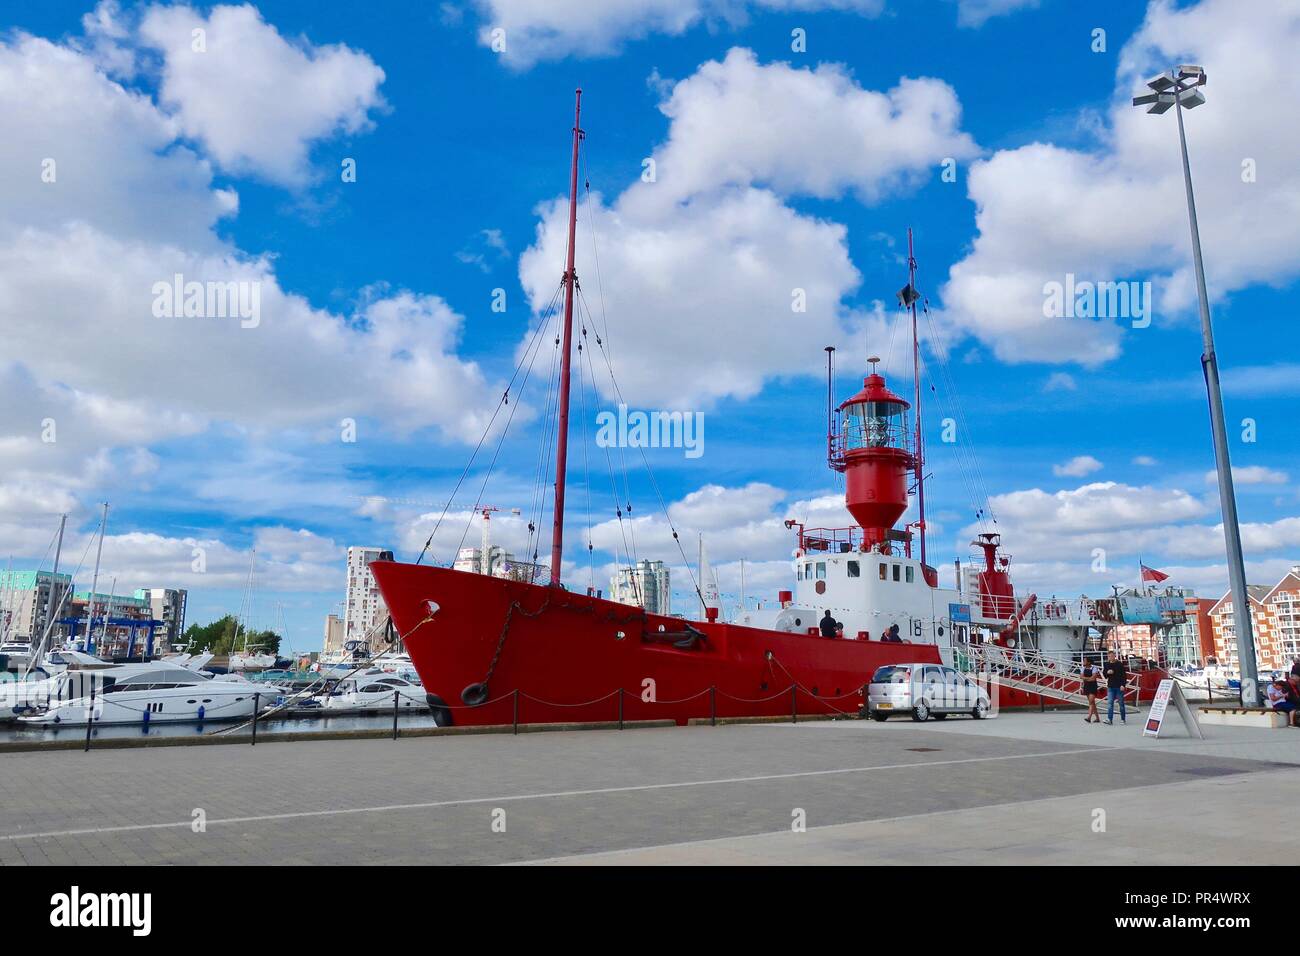 Ipswich, UK. 29th September 2018. UK Weather: Bright warm sunny morning at the waterfront in Ipswich, Suffolk. Credit: Angela Chalmers/Alamy Live News Stock Photo